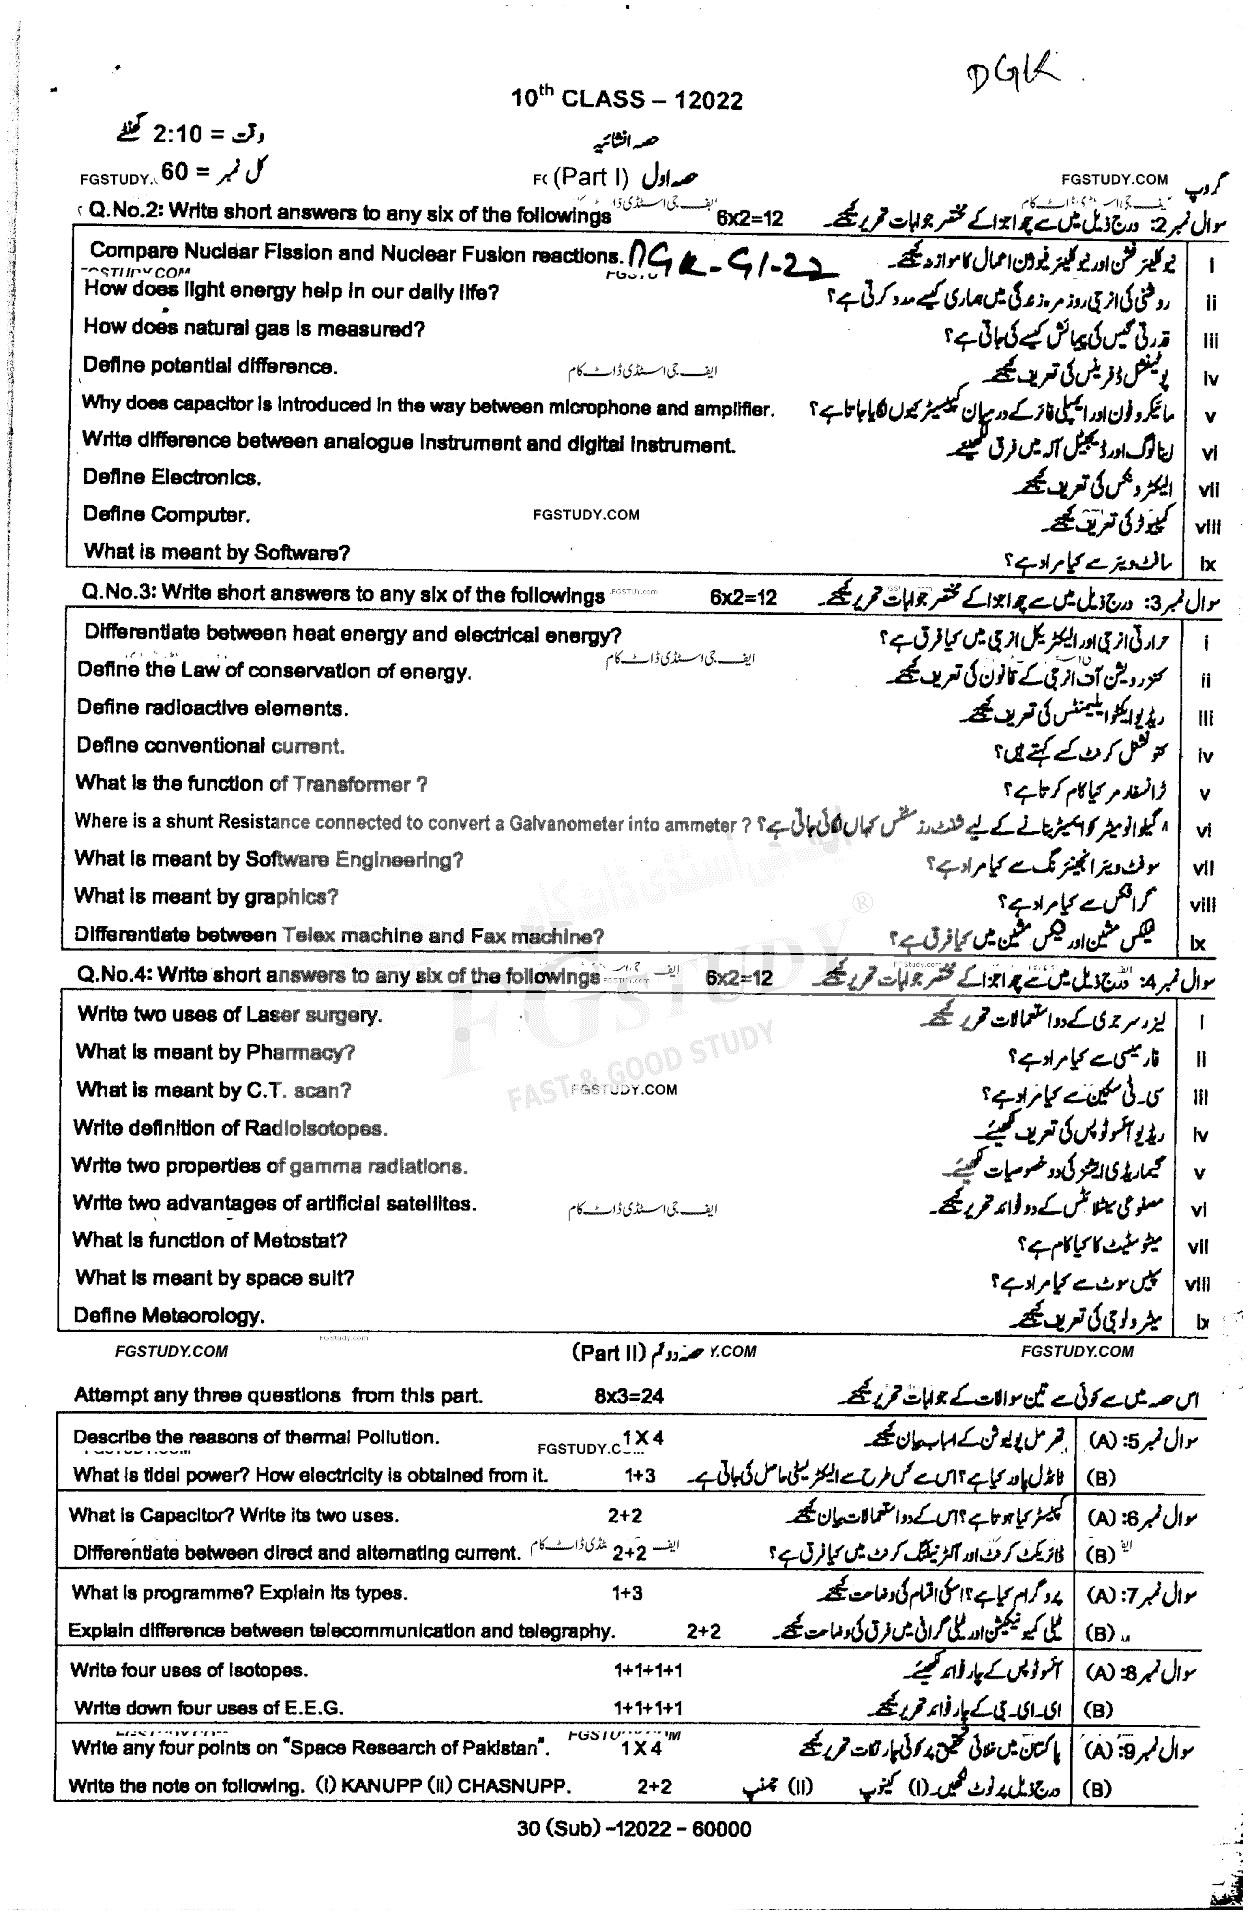 10th Class General Science Past Paper 2022 Dg Khan Board Group 1 Subjective